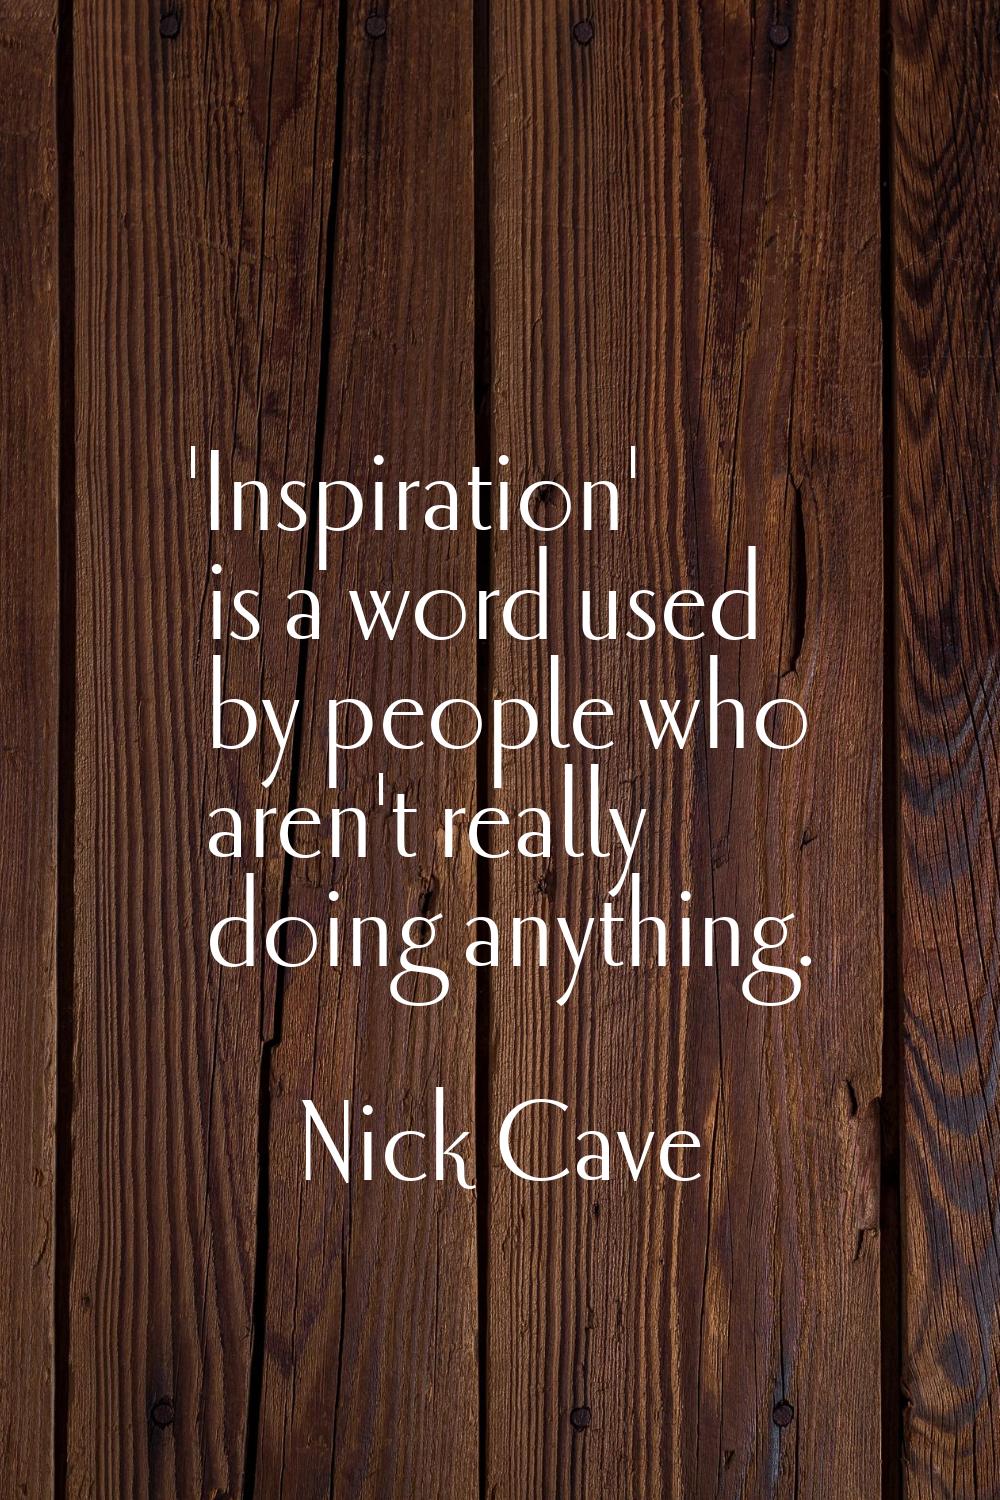 'Inspiration' is a word used by people who aren't really doing anything.